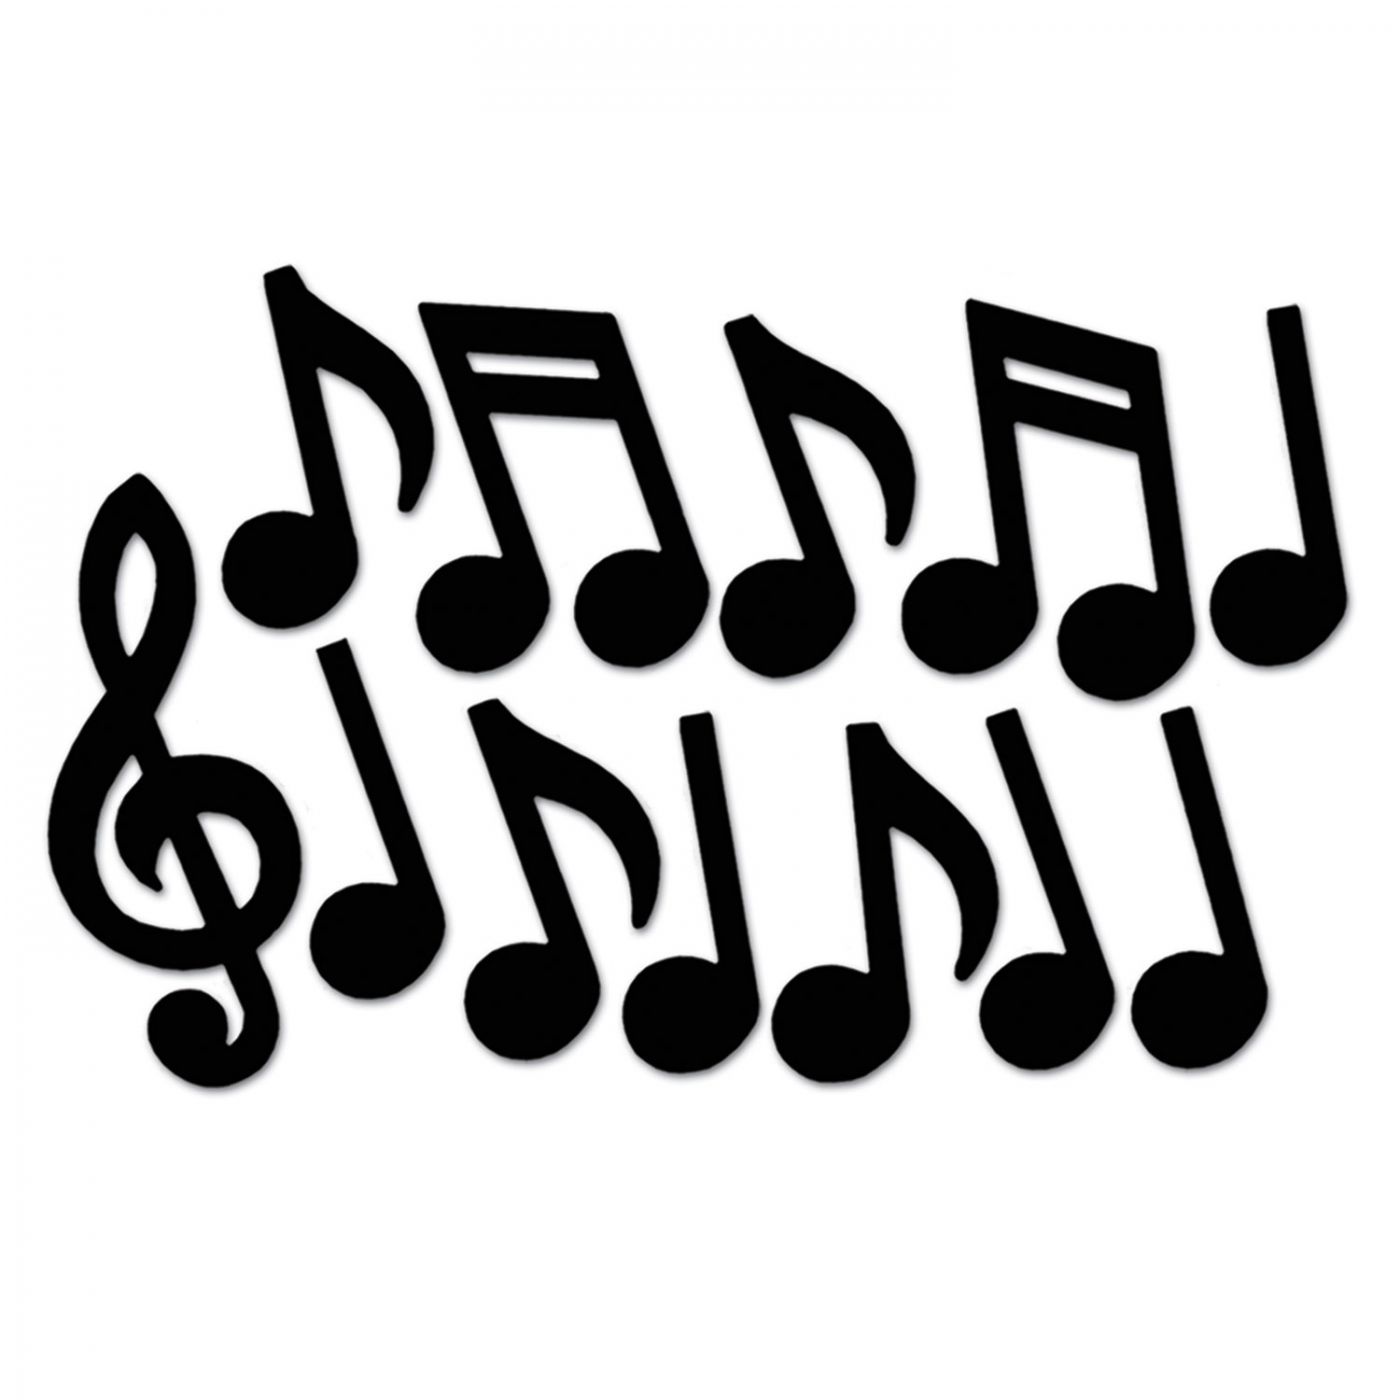 Musical Notes Silhouettes (12) image